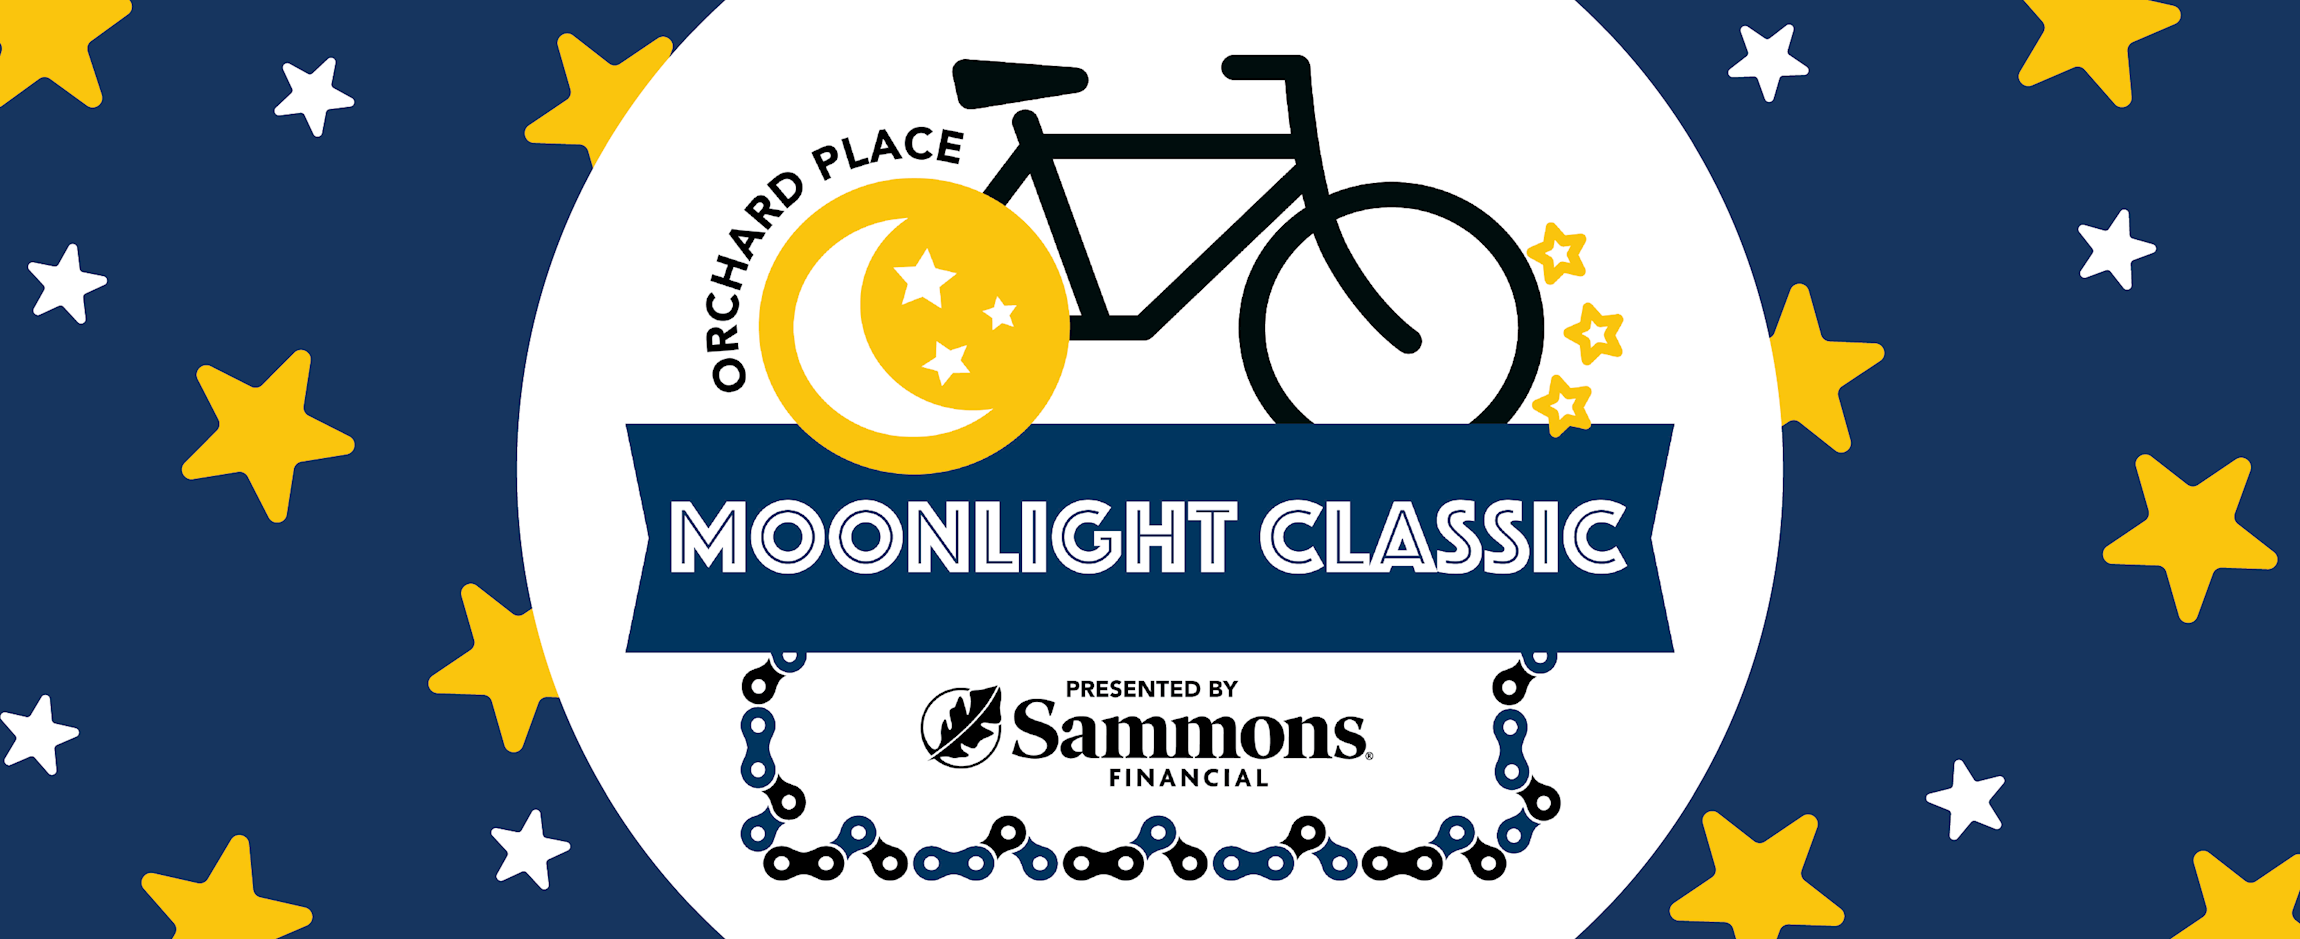 Orchard Place Moonlight Classic